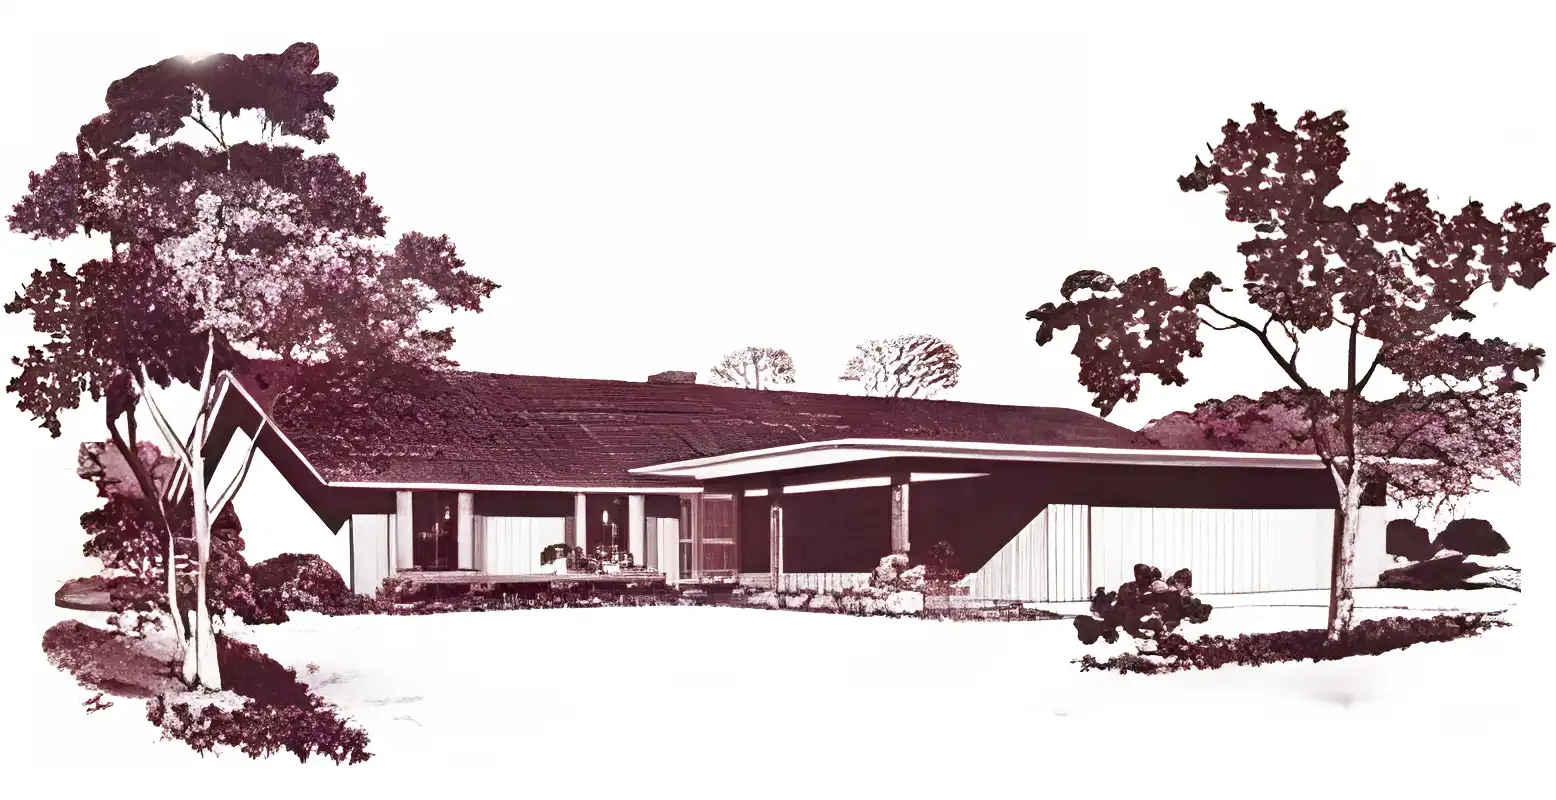 Monochrome rendering of 1960s ranch style house, variant combining gable roof and flat roofed garage.